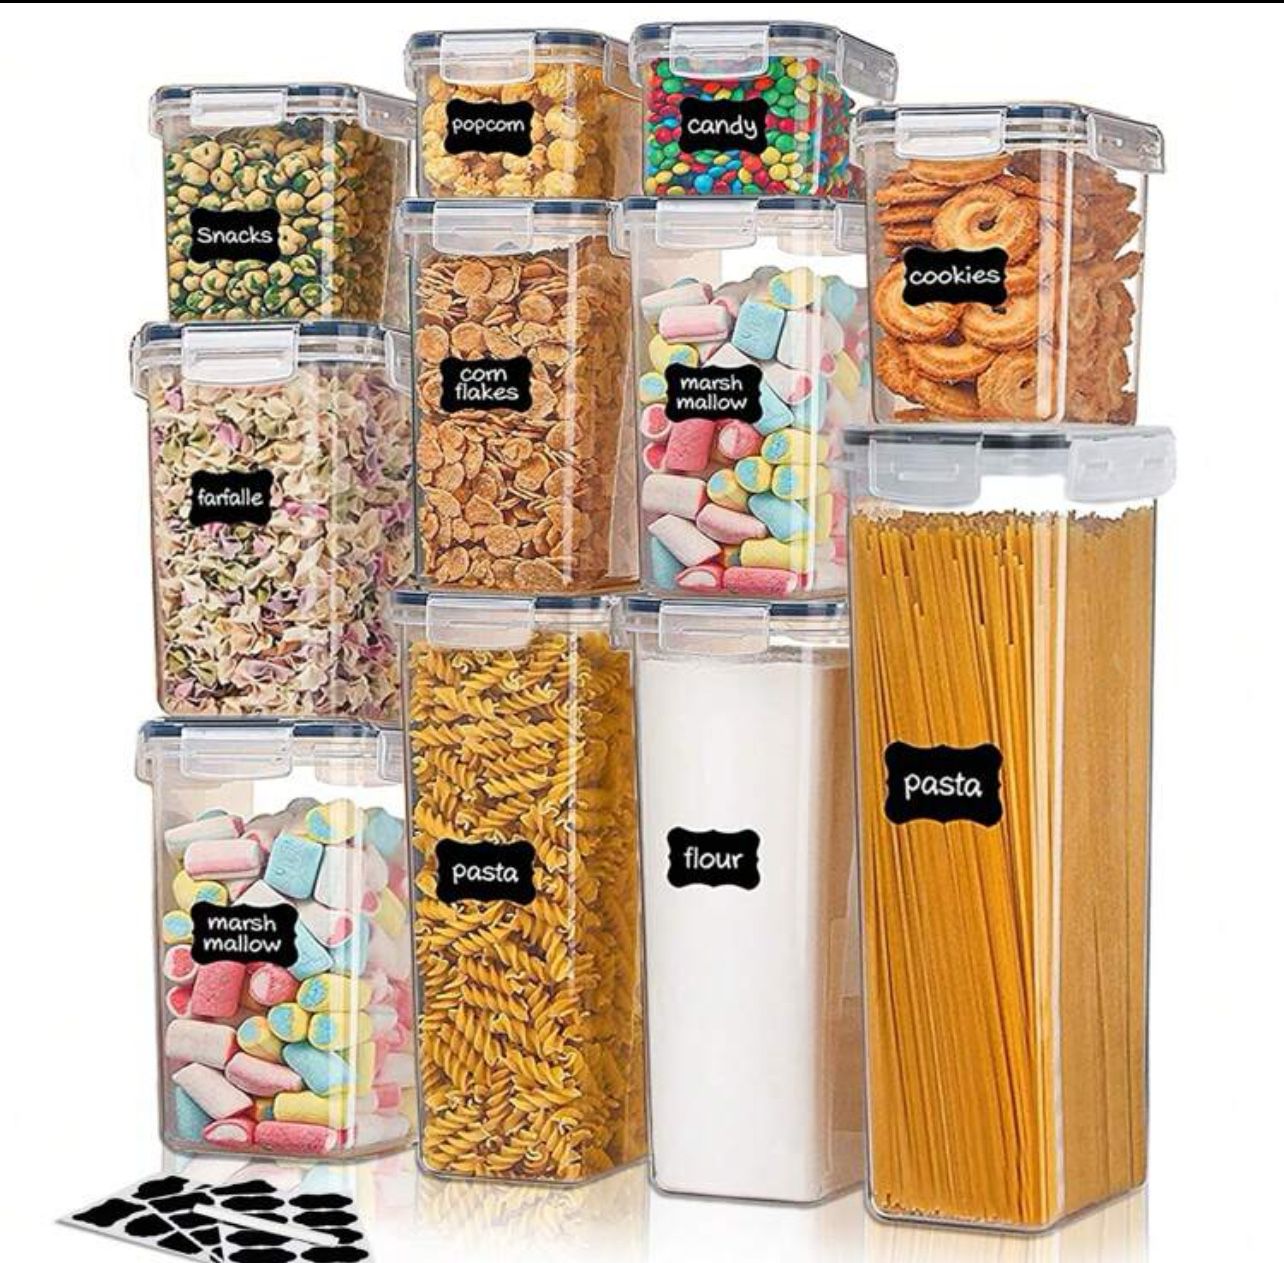 Essential Kitchen Sealed Food Storage Containers - 11 PCS Set With Plastic Canisters Featuring Lids, Labels, And A Marker. Perfect For Organizing And 